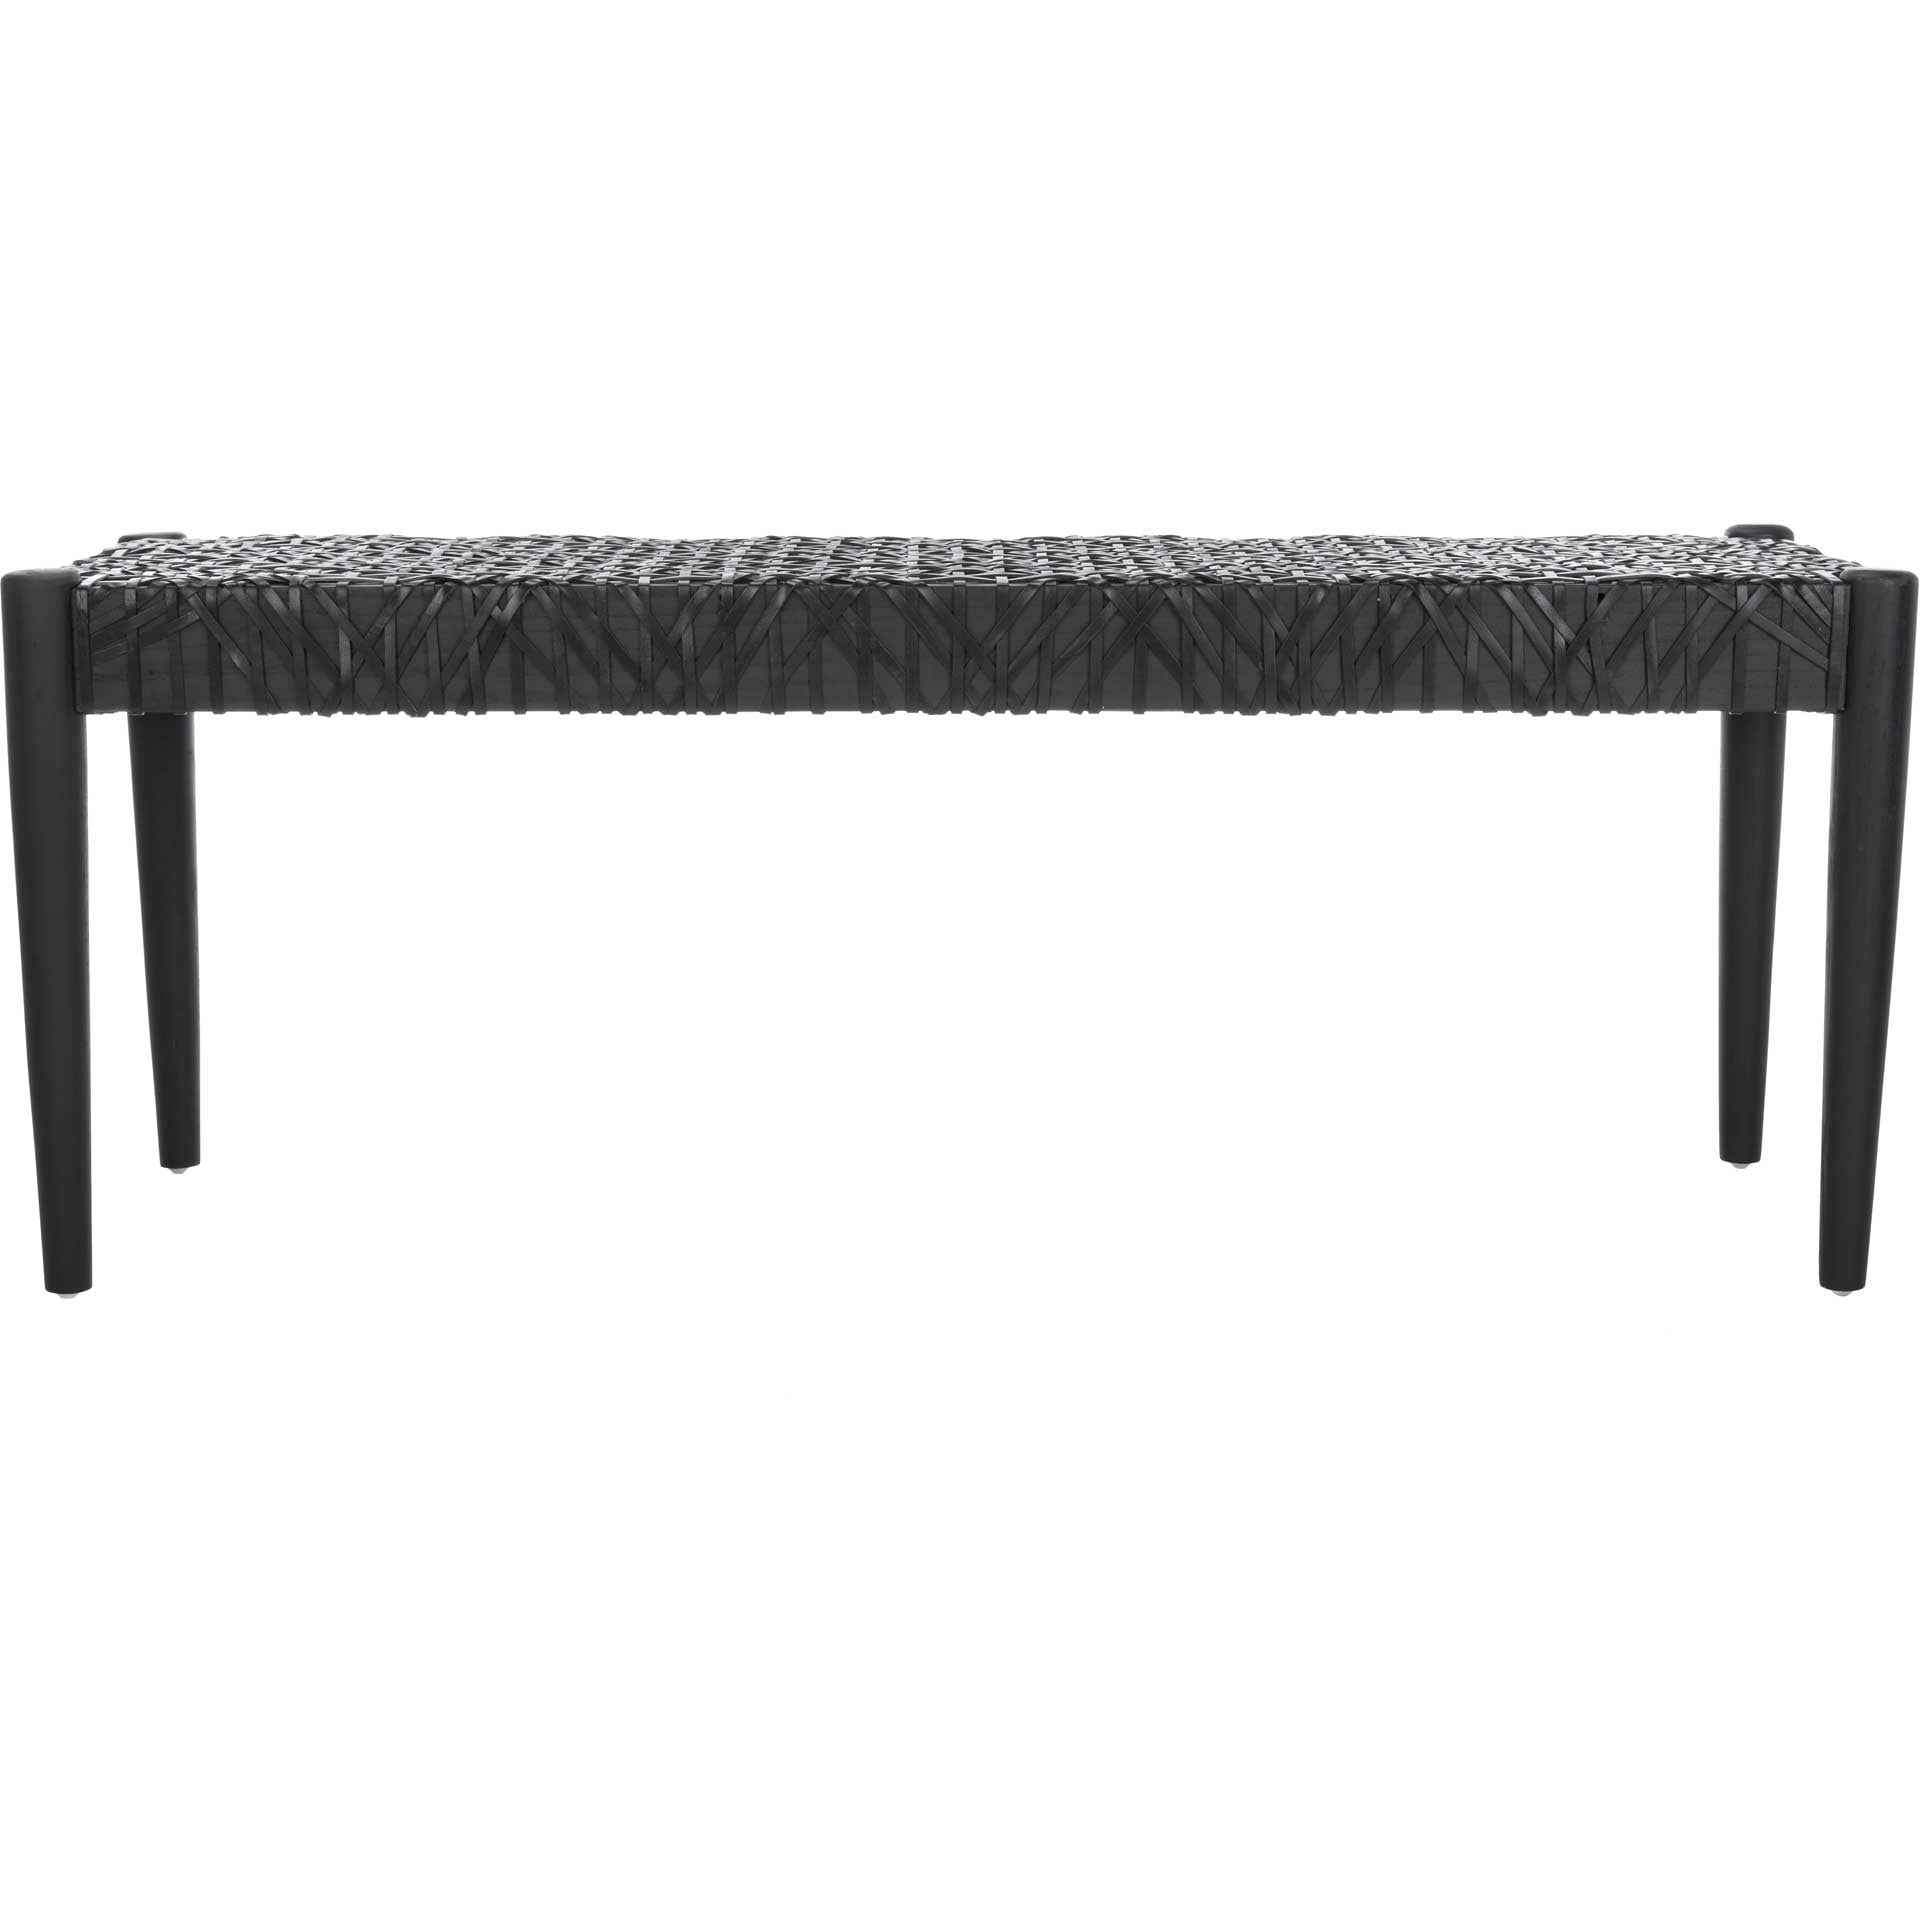 Baize Leather Weave Bench Black/Black